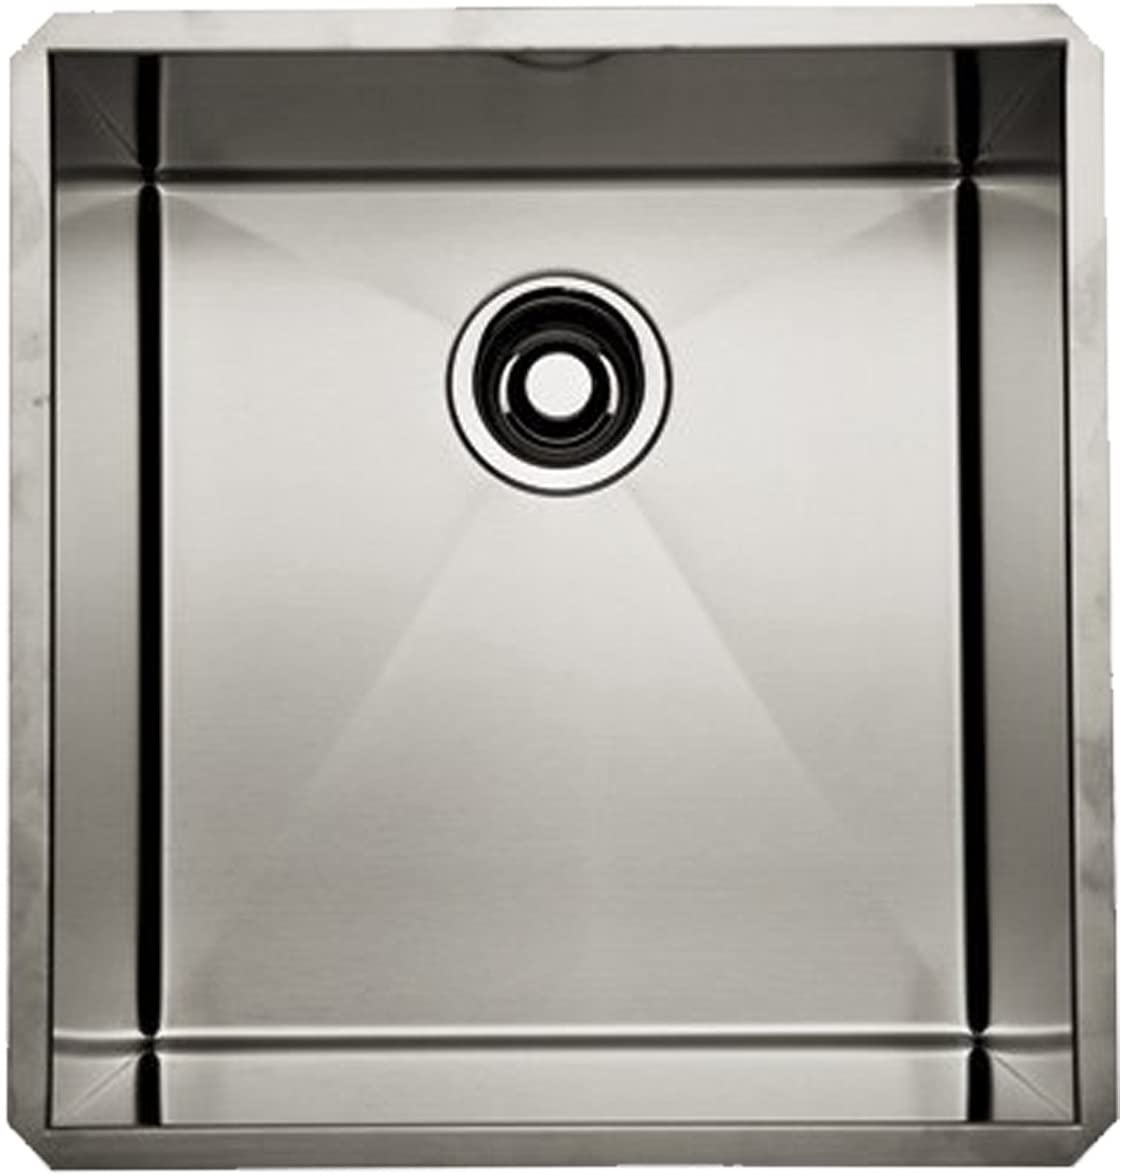 Forze 18-1/2x19-1/2x10" Bar Sink in Brushed Stainless Steel